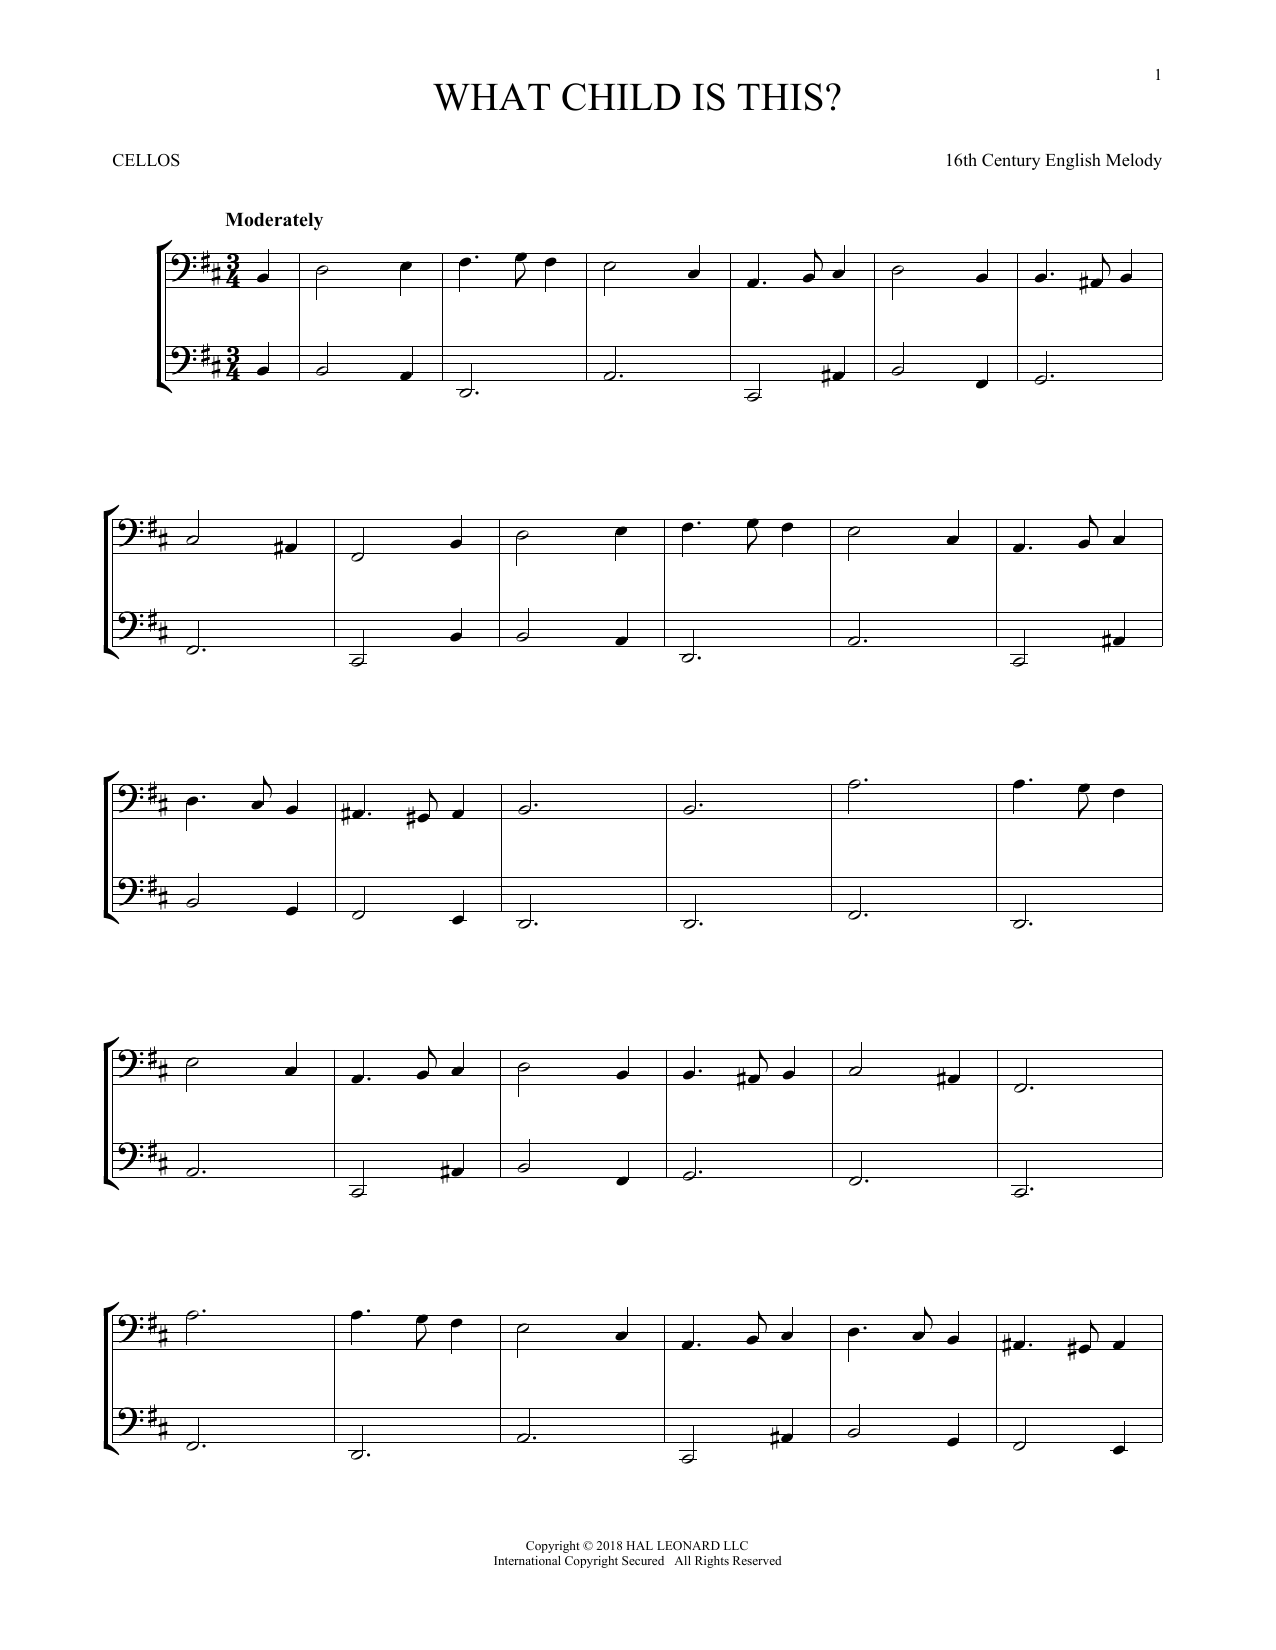 Download 16th Century English Melody What Child Is This? Sheet Music